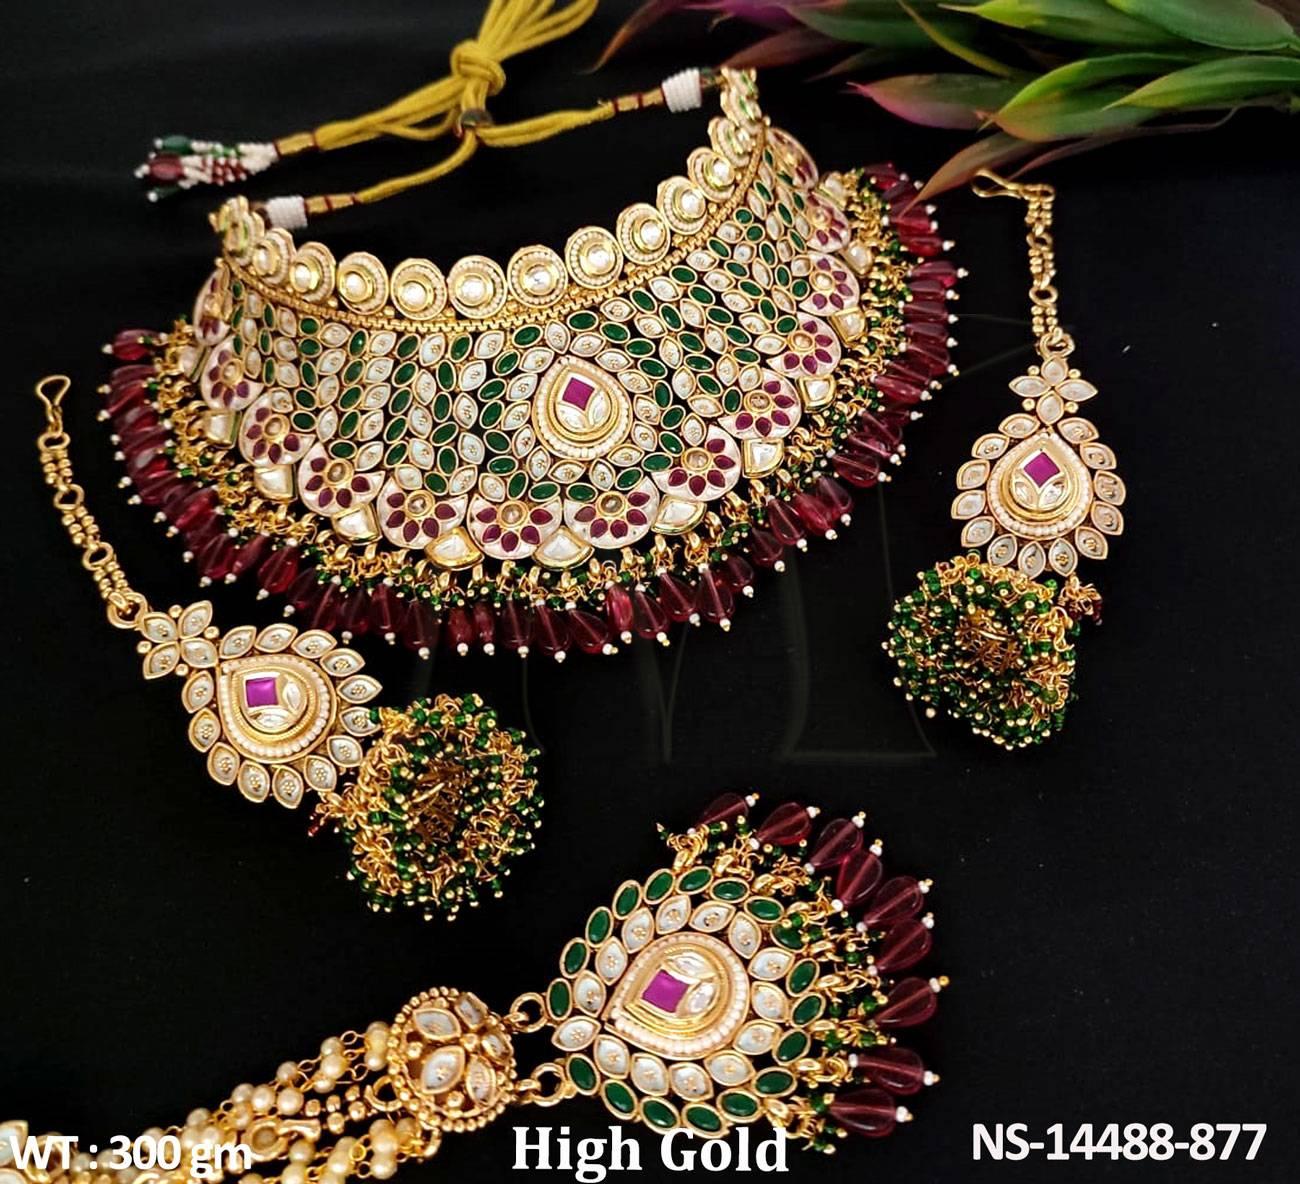 Handcrafted with high-quality materials and intricate designs, this set is perfect for special occasions or everyday wear.